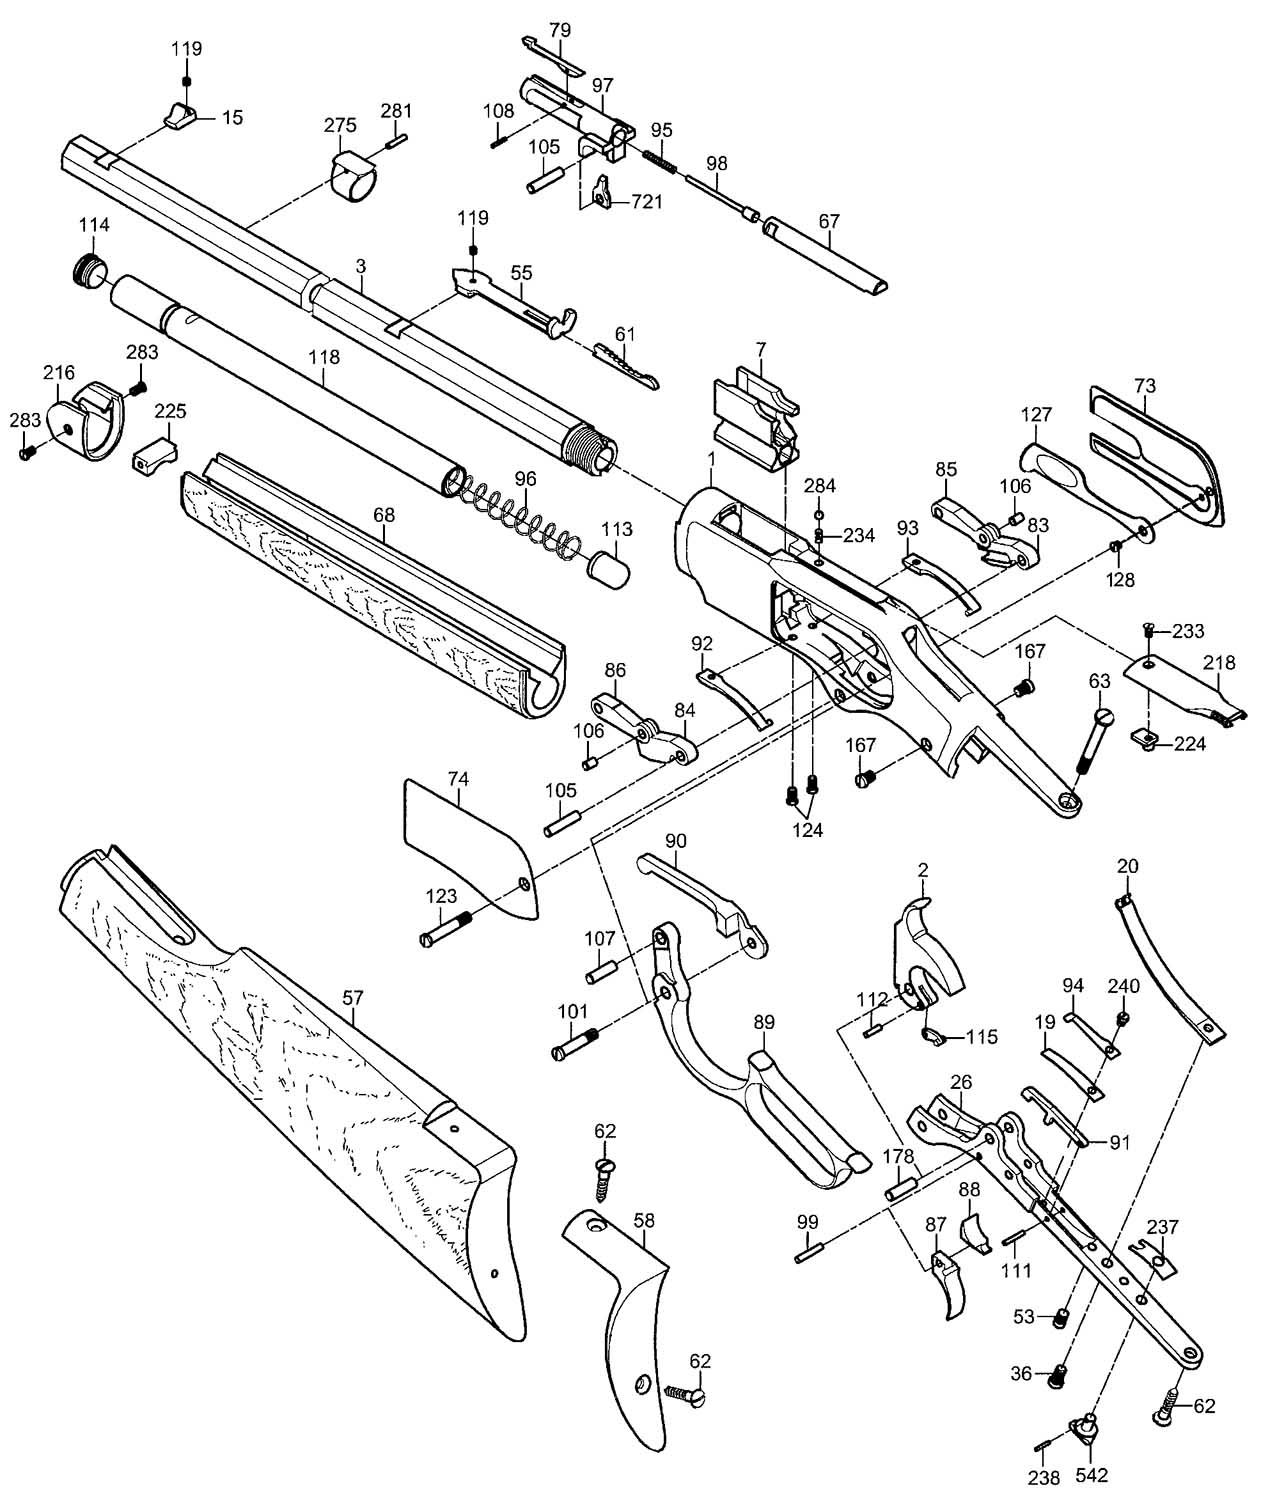 Winchester Model 12 Parts Diagram - Wiring Site Resource